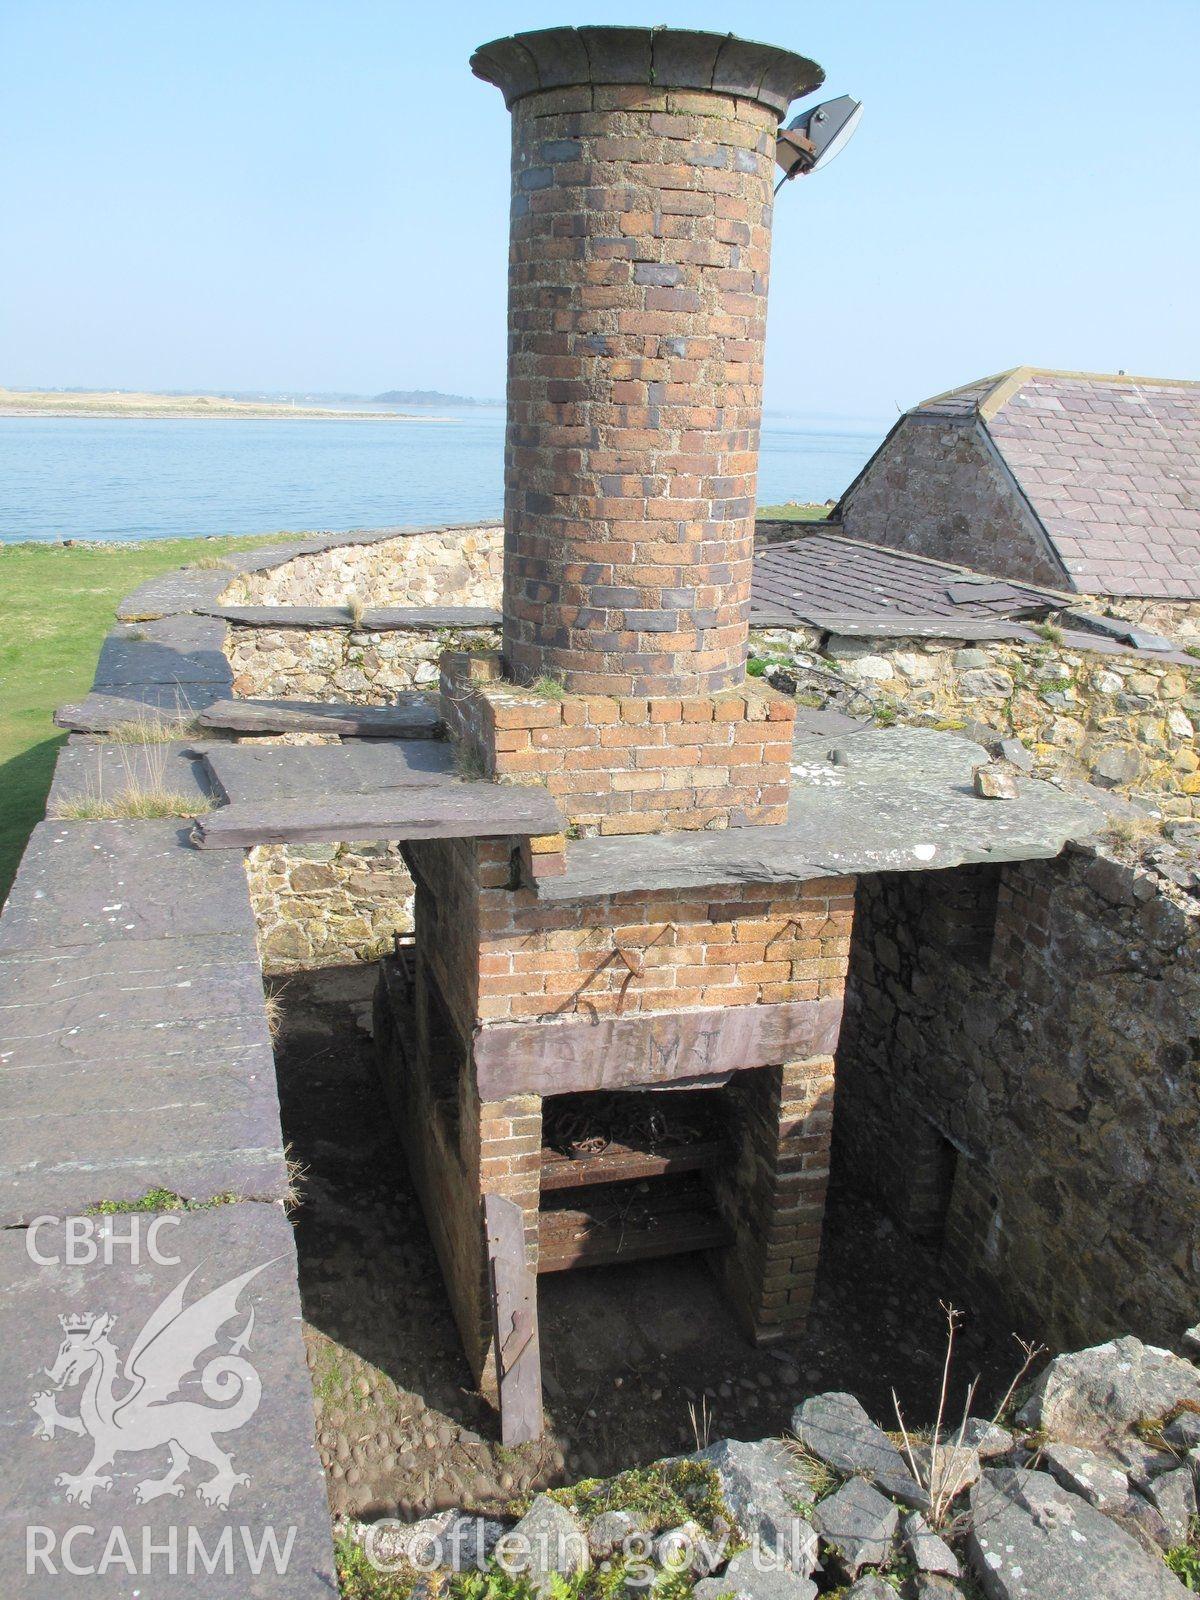 Exterior view of the chain cleaning furnace at Fort Belan.